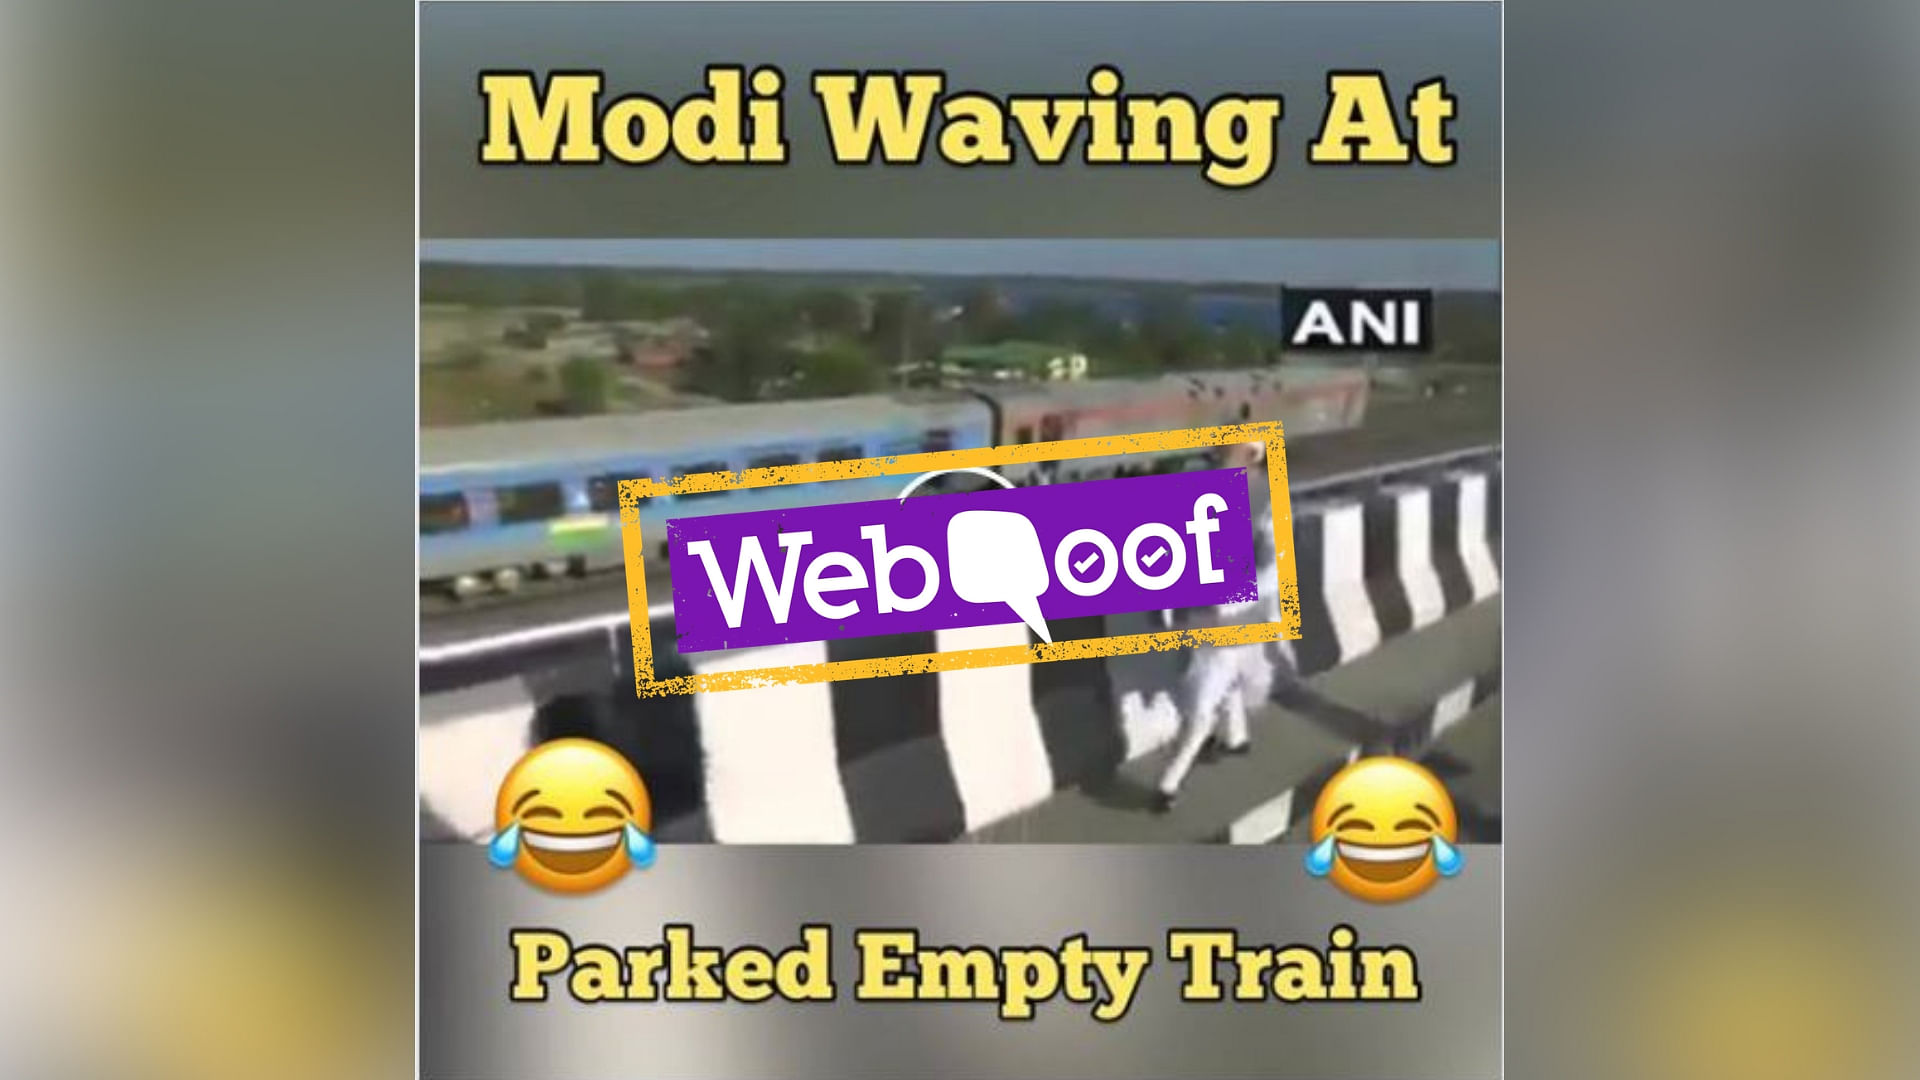 While it certainly seems as though Prime Minister Narendra Modi is indeed waving at an empty train, it is not so.